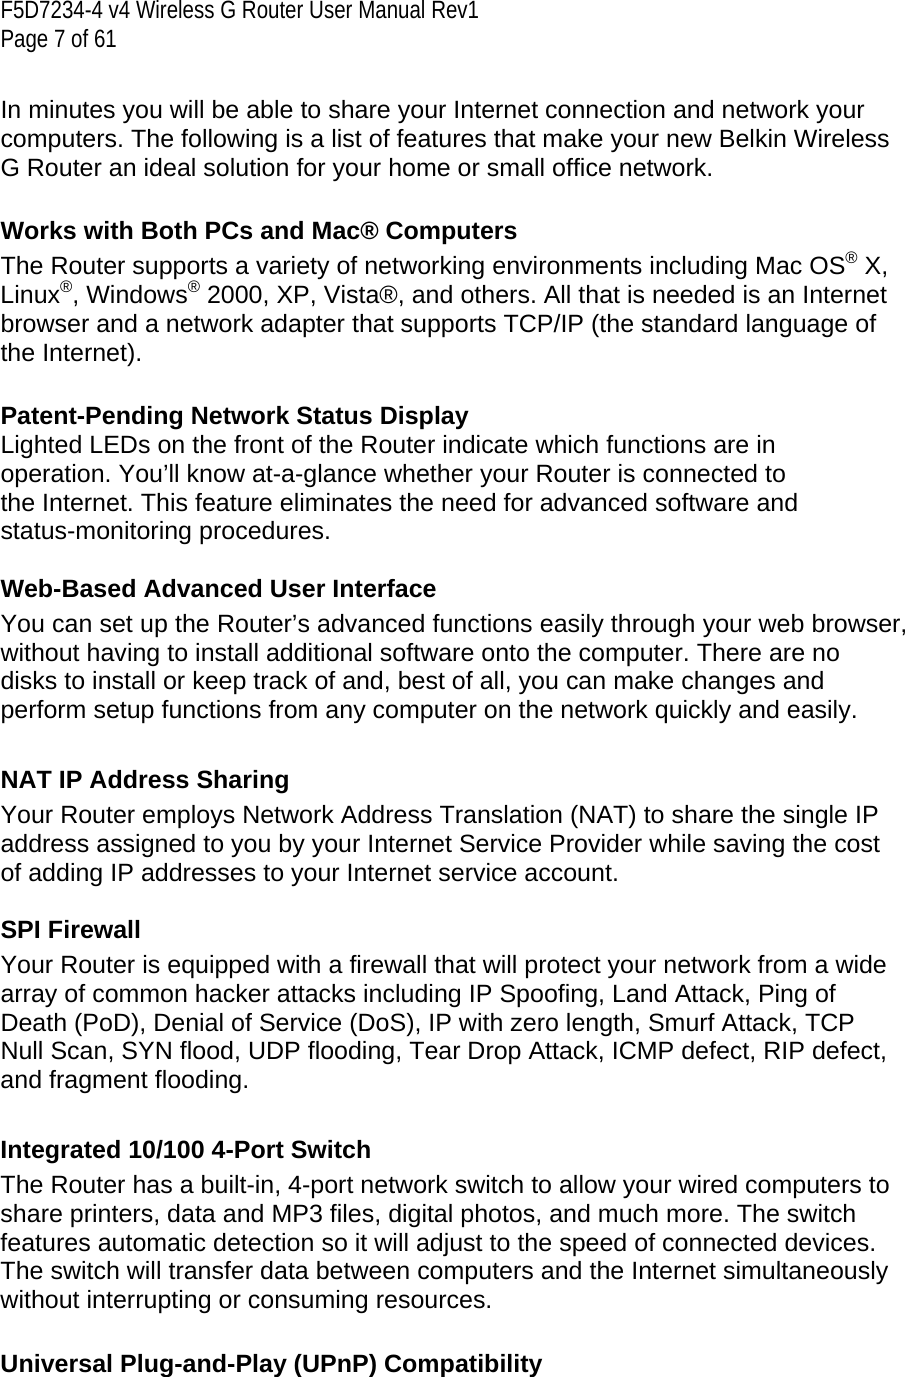 F5D7234-4 v4 Wireless G Router User Manual Rev1  Page 7 of 61   In minutes you will be able to share your Internet connection and network your computers. The following is a list of features that make your new Belkin Wireless G Router an ideal solution for your home or small office network.   Works with Both PCs and Mac® Computers The Router supports a variety of networking environments including Mac OS® X, Linux®, Windows® 2000, XP, Vista®, and others. All that is needed is an Internet browser and a network adapter that supports TCP/IP (the standard language of the Internet).   Patent-Pending Network Status Display Lighted LEDs on the front of the Router indicate which functions are in operation. You’ll know at-a-glance whether your Router is connected to the Internet. This feature eliminates the need for advanced software and status-monitoring procedures.  Web-Based Advanced User Interface You can set up the Router’s advanced functions easily through your web browser, without having to install additional software onto the computer. There are no disks to install or keep track of and, best of all, you can make changes and perform setup functions from any computer on the network quickly and easily.  NAT IP Address Sharing Your Router employs Network Address Translation (NAT) to share the single IP address assigned to you by your Internet Service Provider while saving the cost of adding IP addresses to your Internet service account.   SPI Firewall Your Router is equipped with a firewall that will protect your network from a wide array of common hacker attacks including IP Spoofing, Land Attack, Ping of Death (PoD), Denial of Service (DoS), IP with zero length, Smurf Attack, TCP Null Scan, SYN flood, UDP flooding, Tear Drop Attack, ICMP defect, RIP defect, and fragment flooding.  Integrated 10/100 4-Port Switch The Router has a built-in, 4-port network switch to allow your wired computers to share printers, data and MP3 files, digital photos, and much more. The switch features automatic detection so it will adjust to the speed of connected devices. The switch will transfer data between computers and the Internet simultaneously without interrupting or consuming resources.  Universal Plug-and-Play (UPnP) Compatibility 